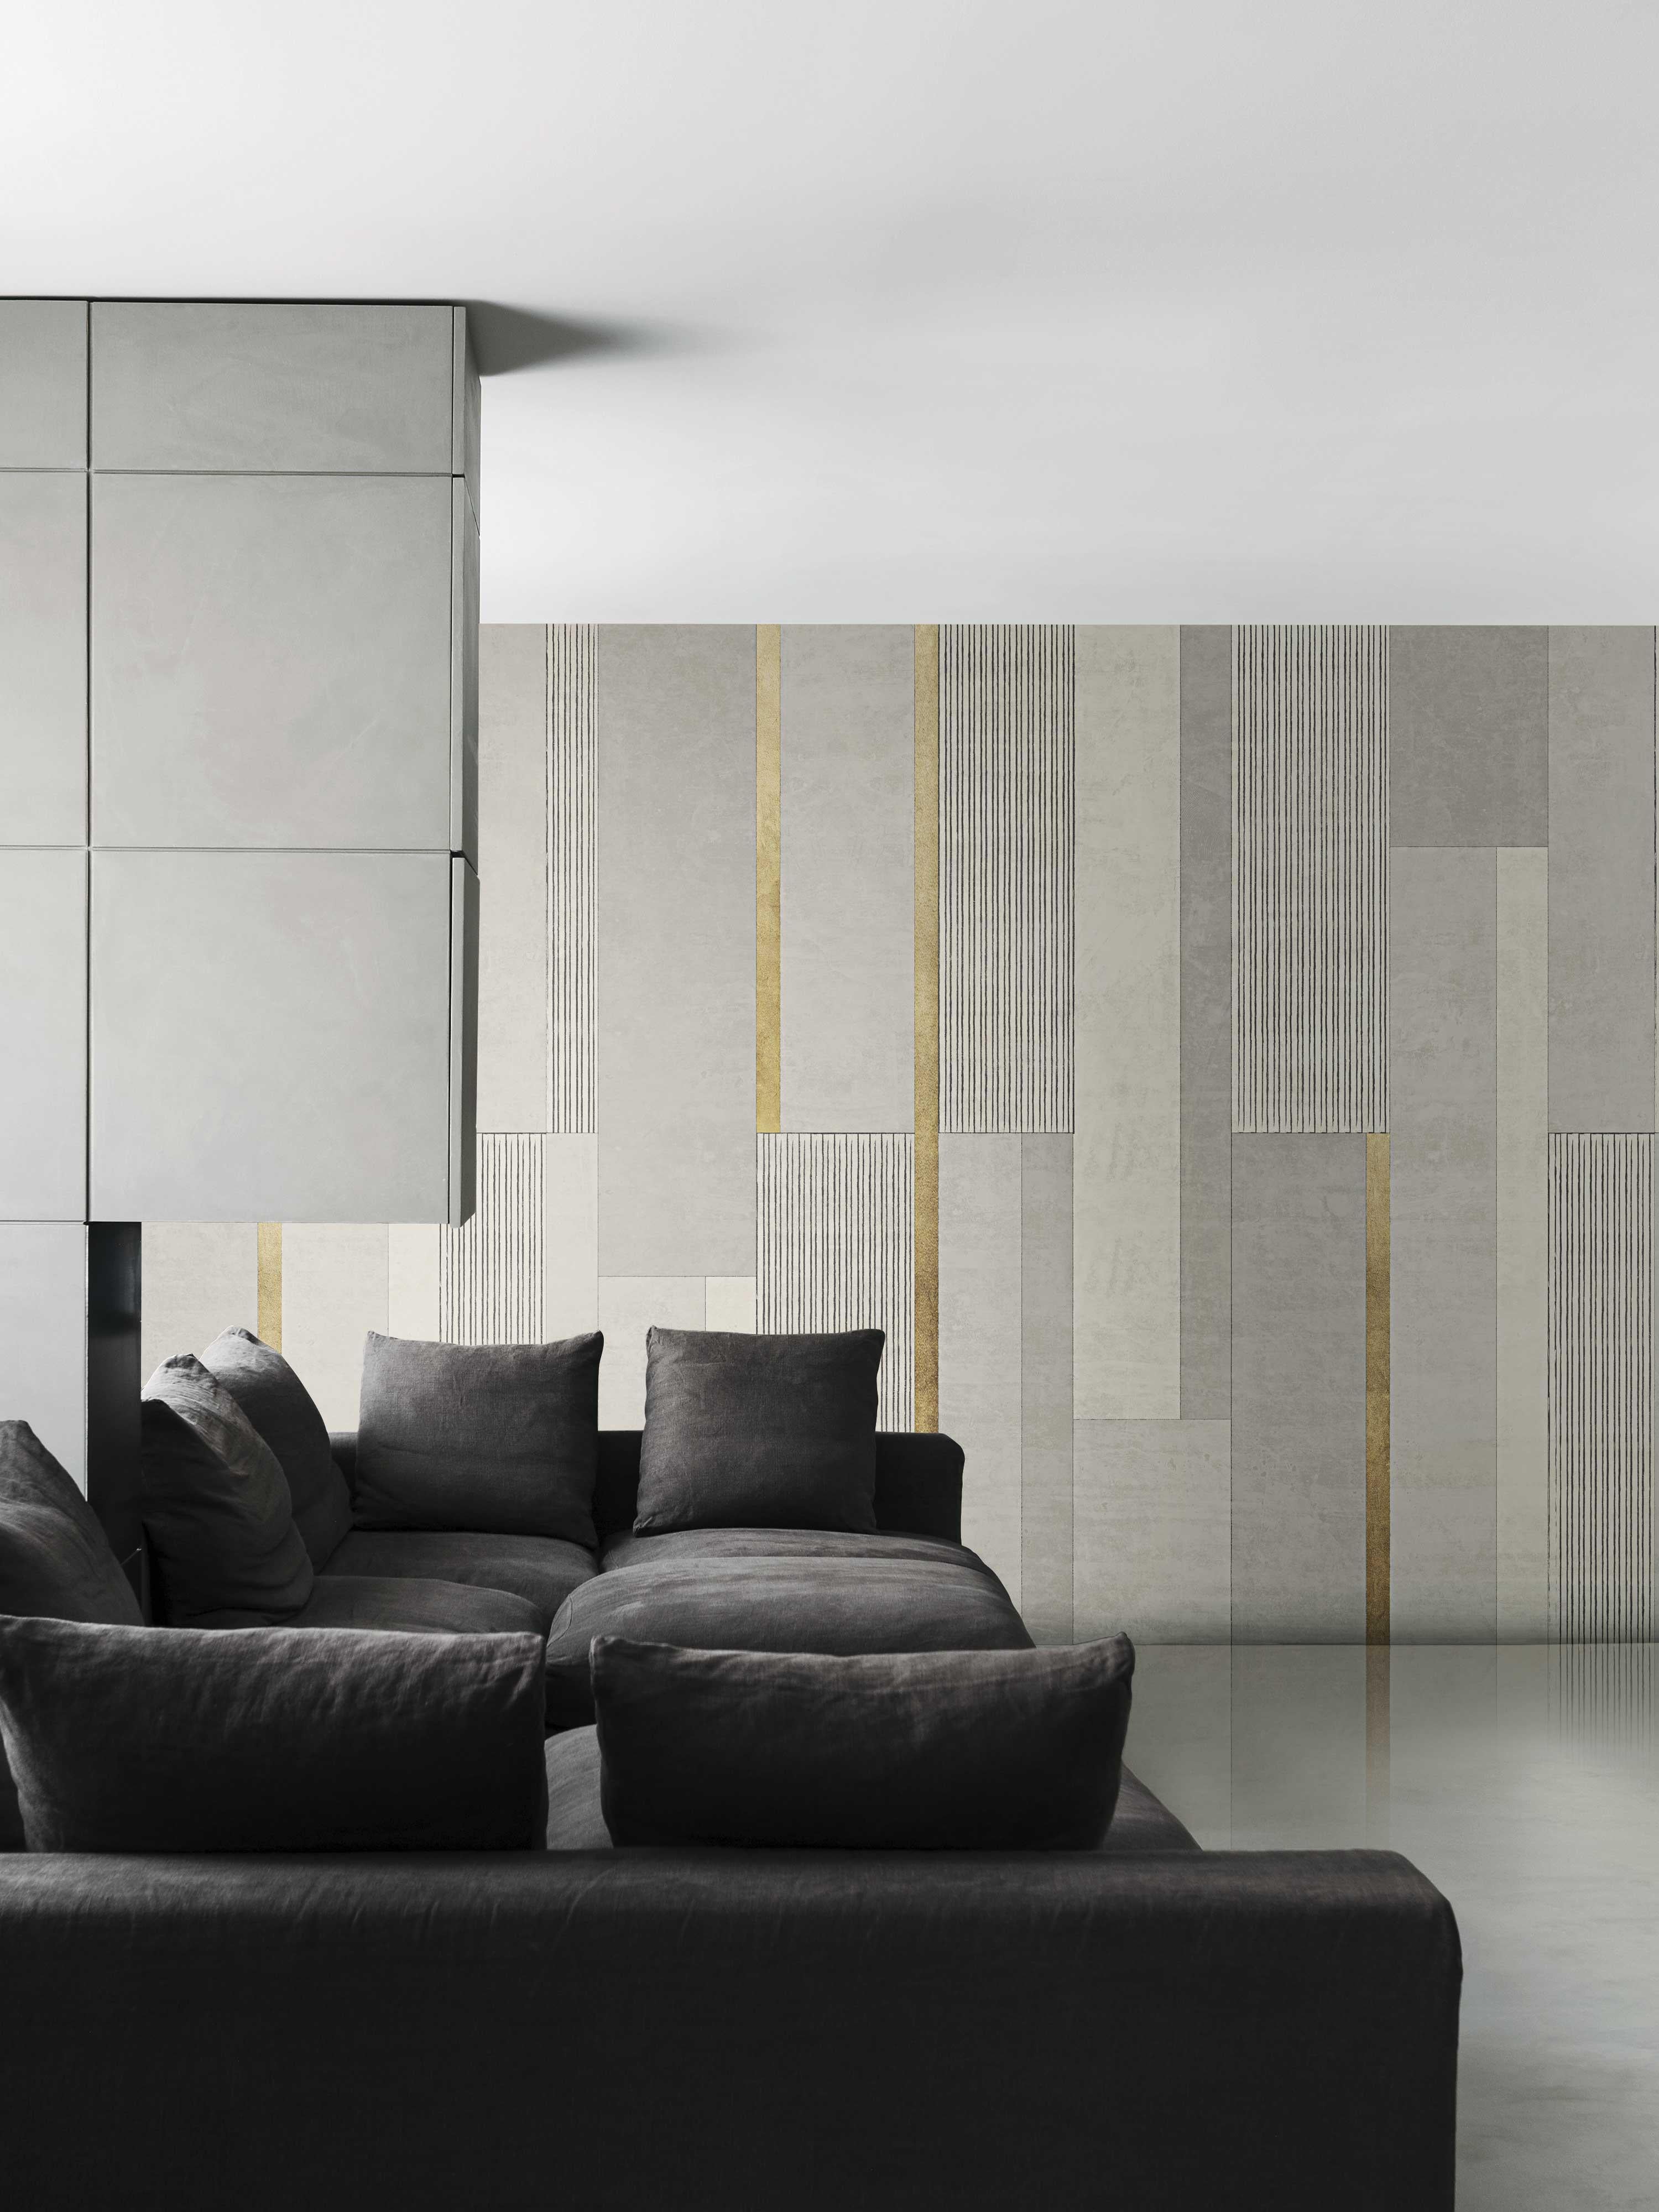 Available in pearl grey, this wallpaper, composed of vertical elements of different materials, is extremely sober and elegant and fits perfectly in any type of context. Measures: 300x310 cm.